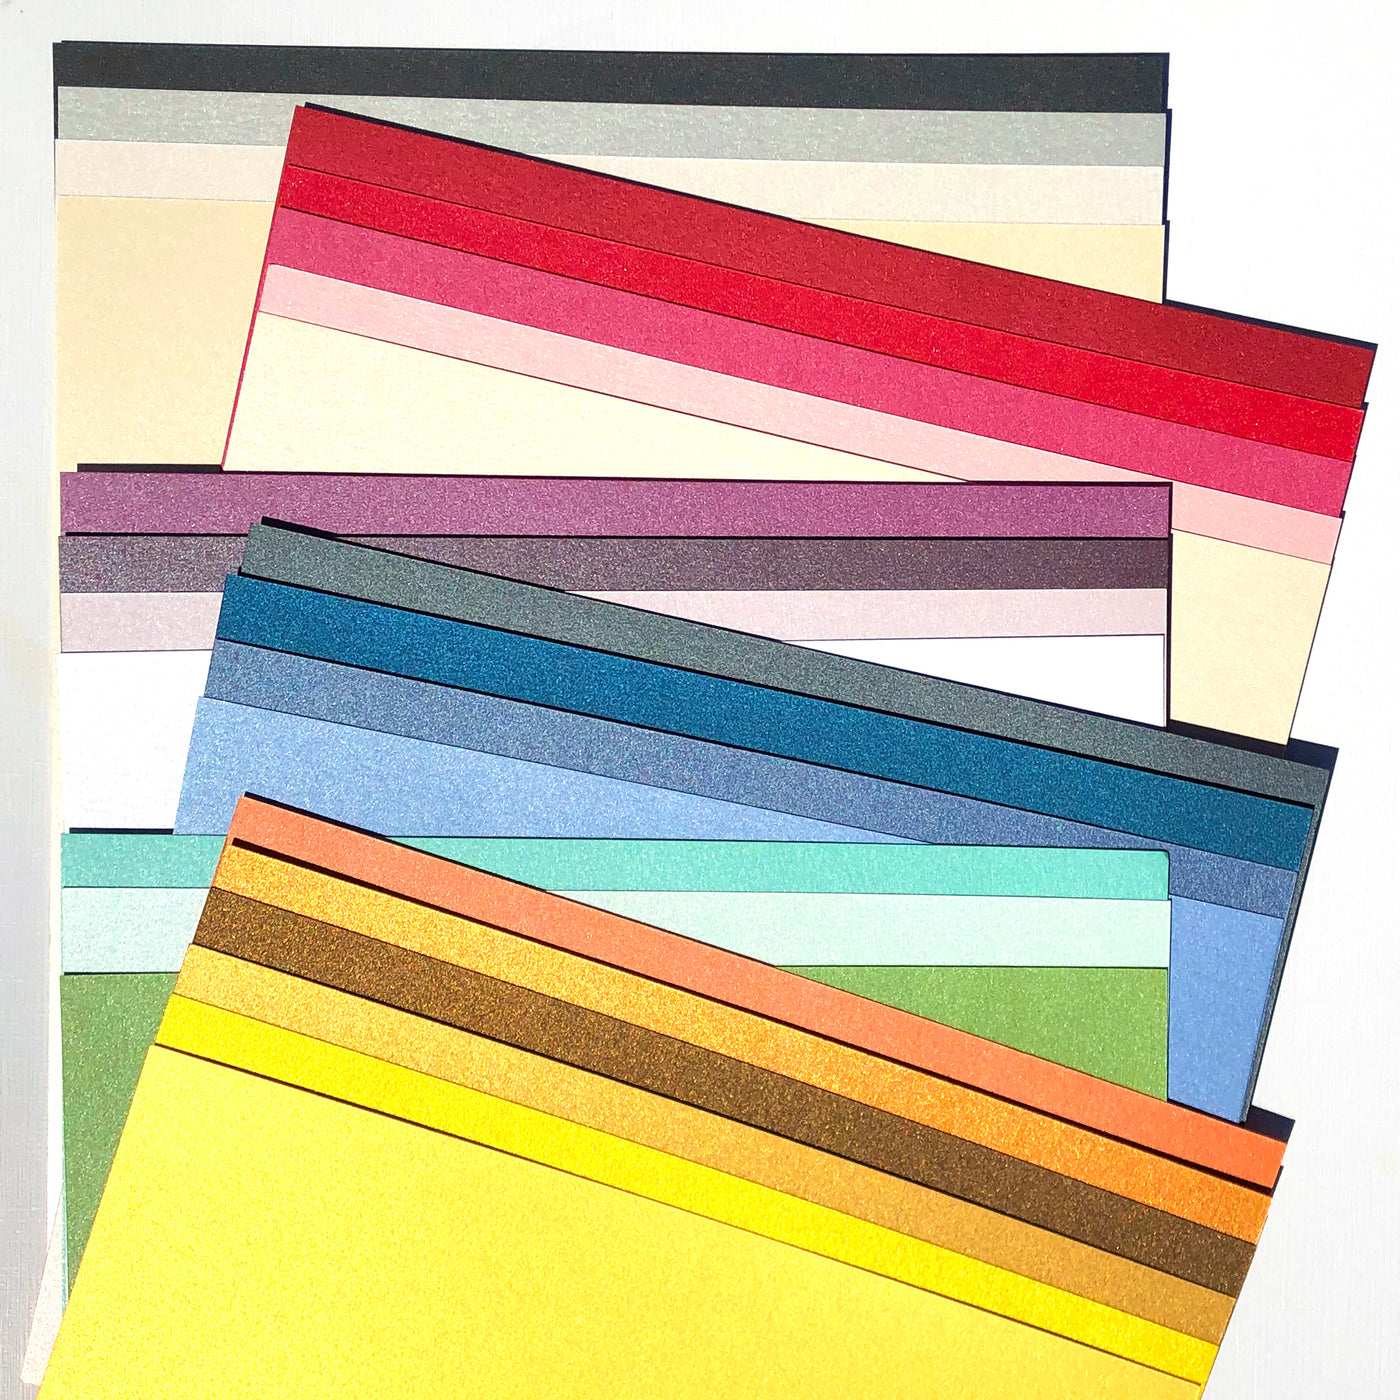 Neenah Stardream Collection Pack includes complete set of 28 colors in 12x12 size